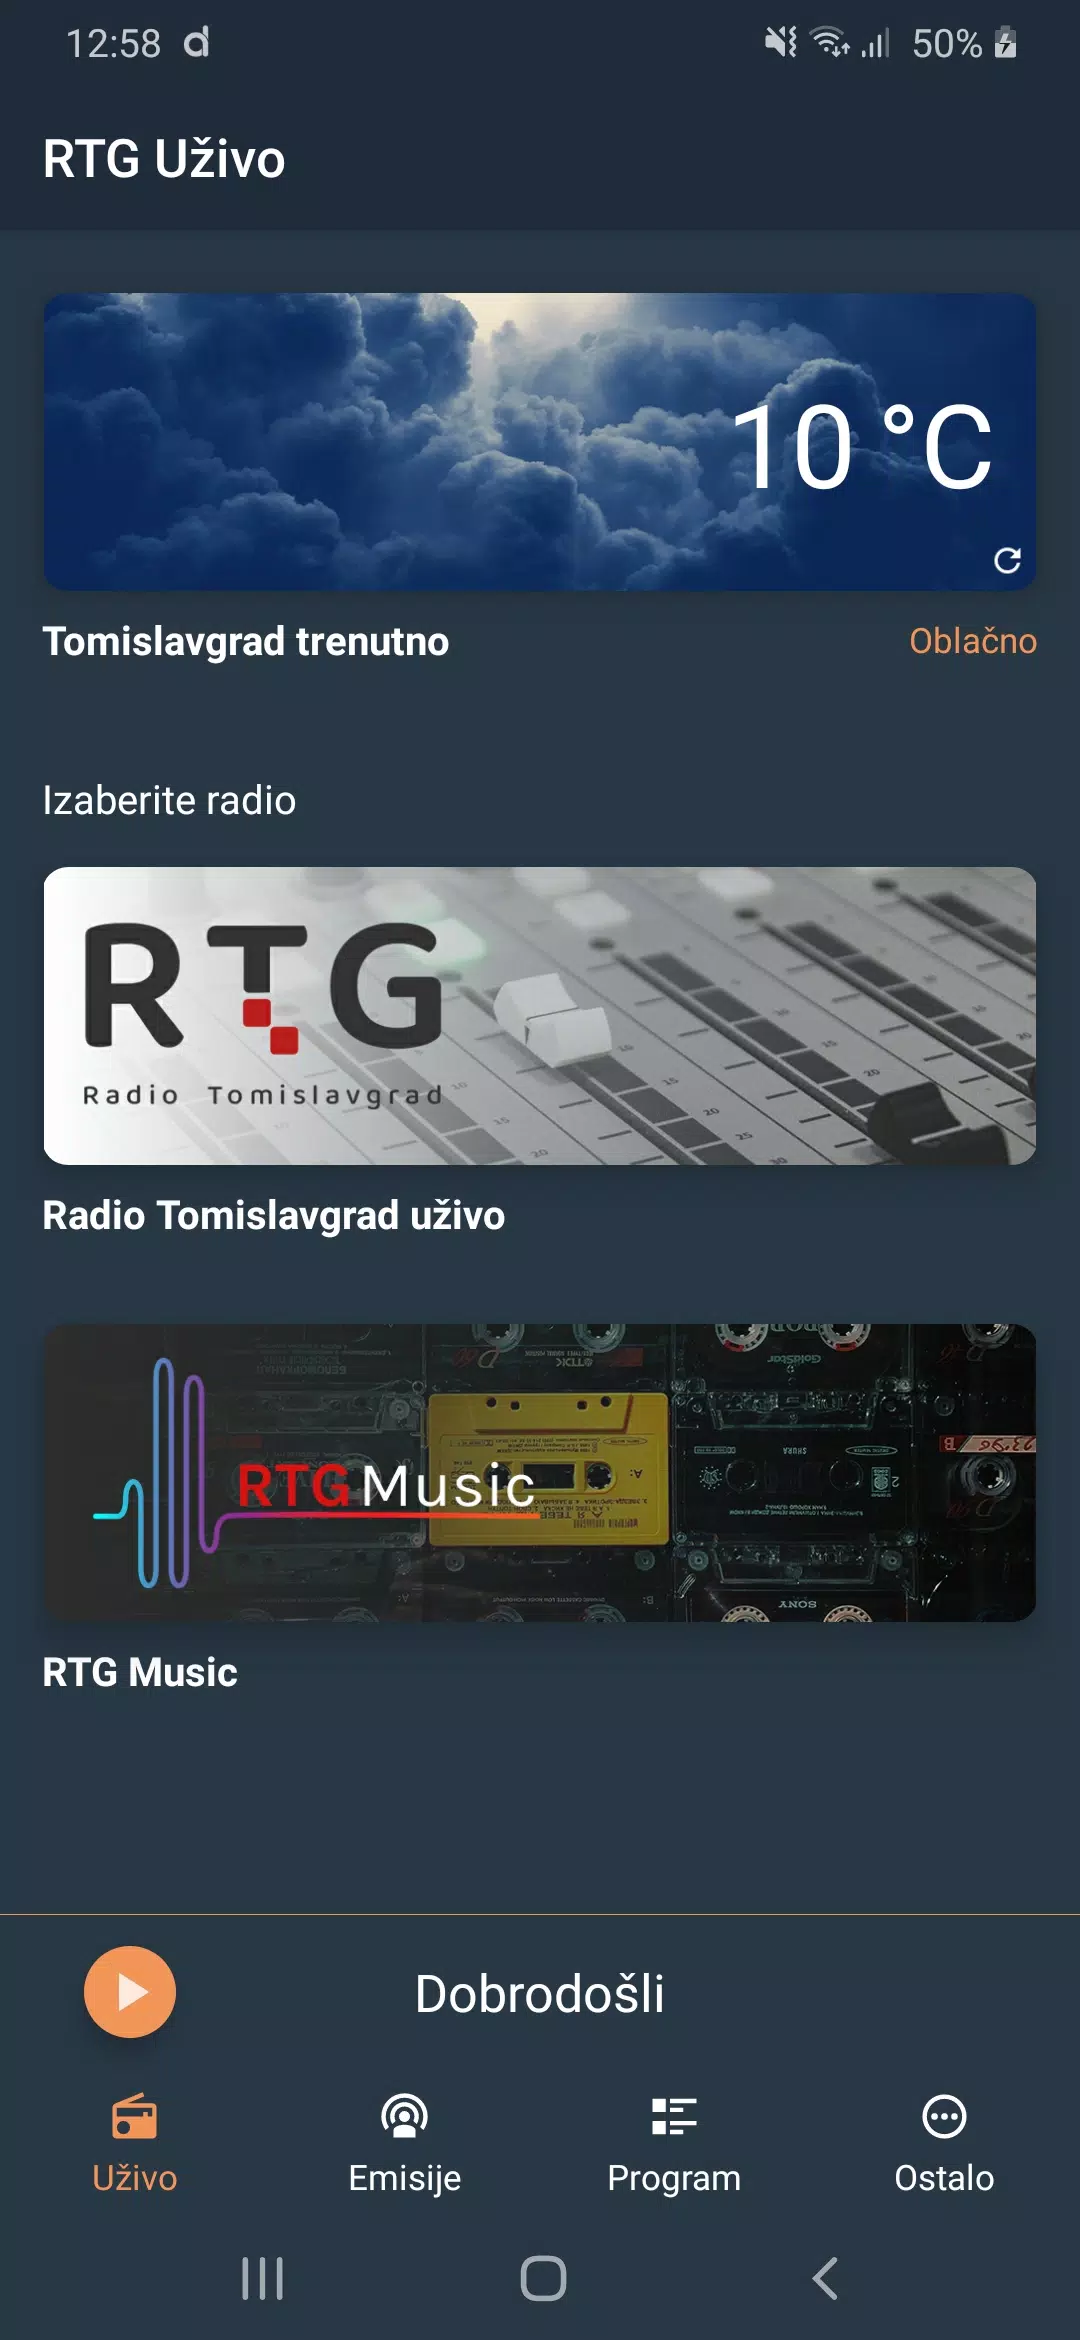 Radio Tomislavgrad for Android - APK Download